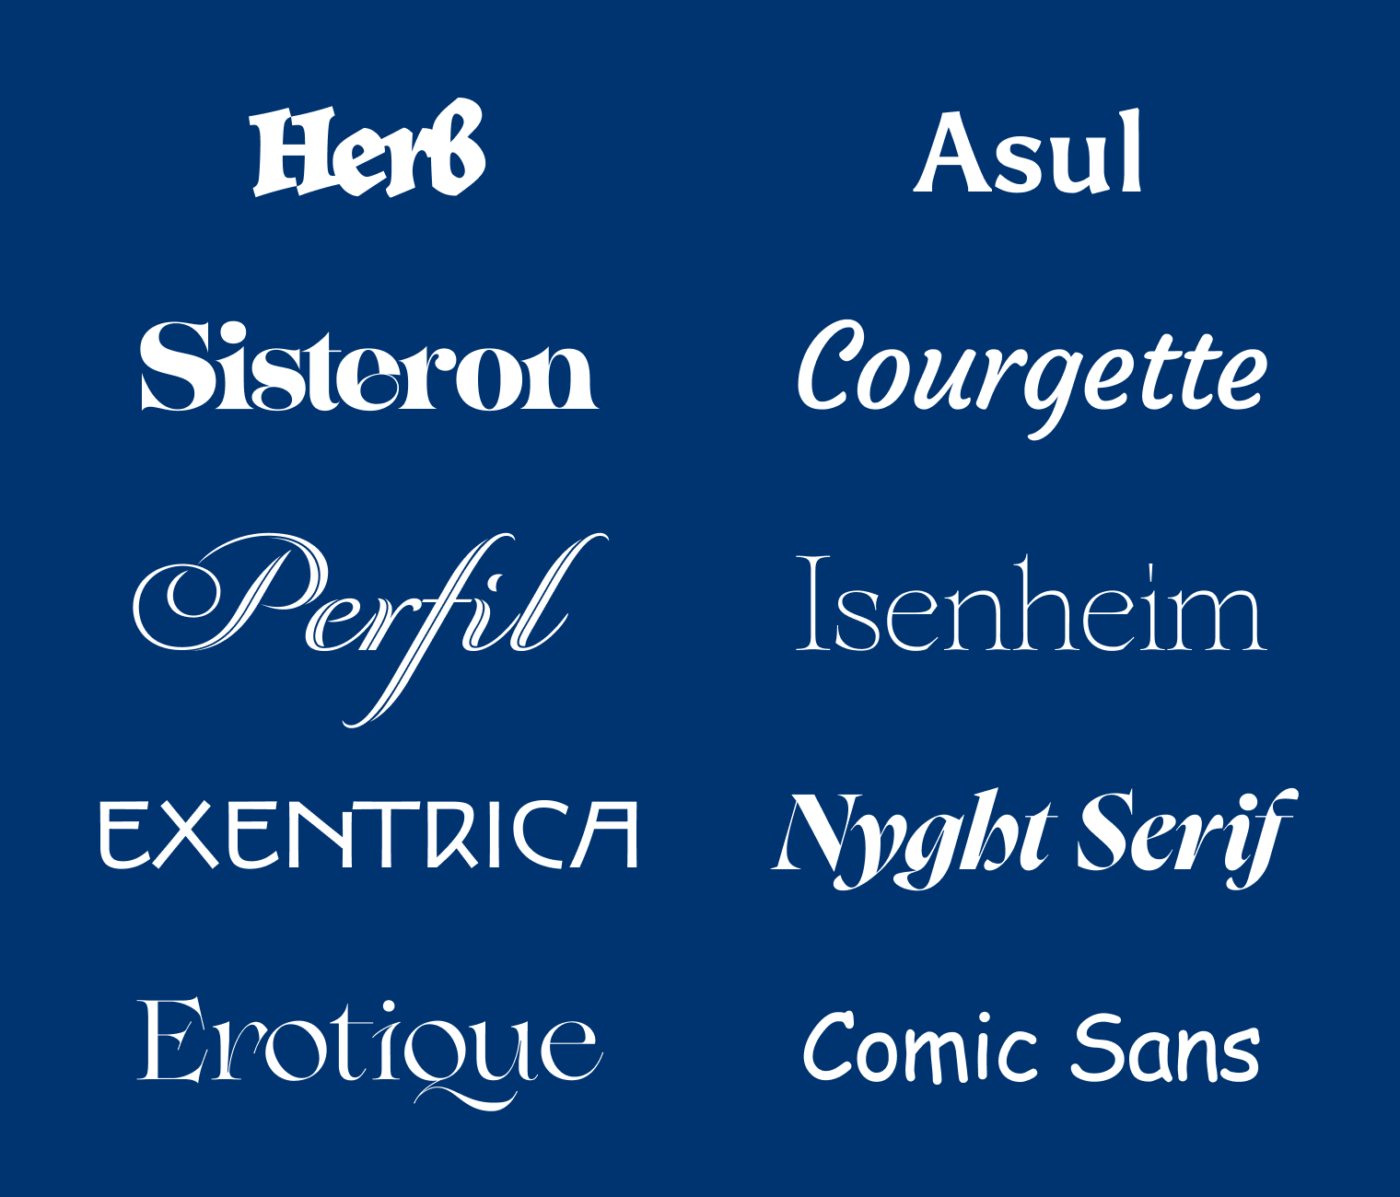 Herb, Asul, Sisteron, Courgette, Perfil, Isenheim, Exentrica, Nyght Serif, Erotique and … Comic Sans